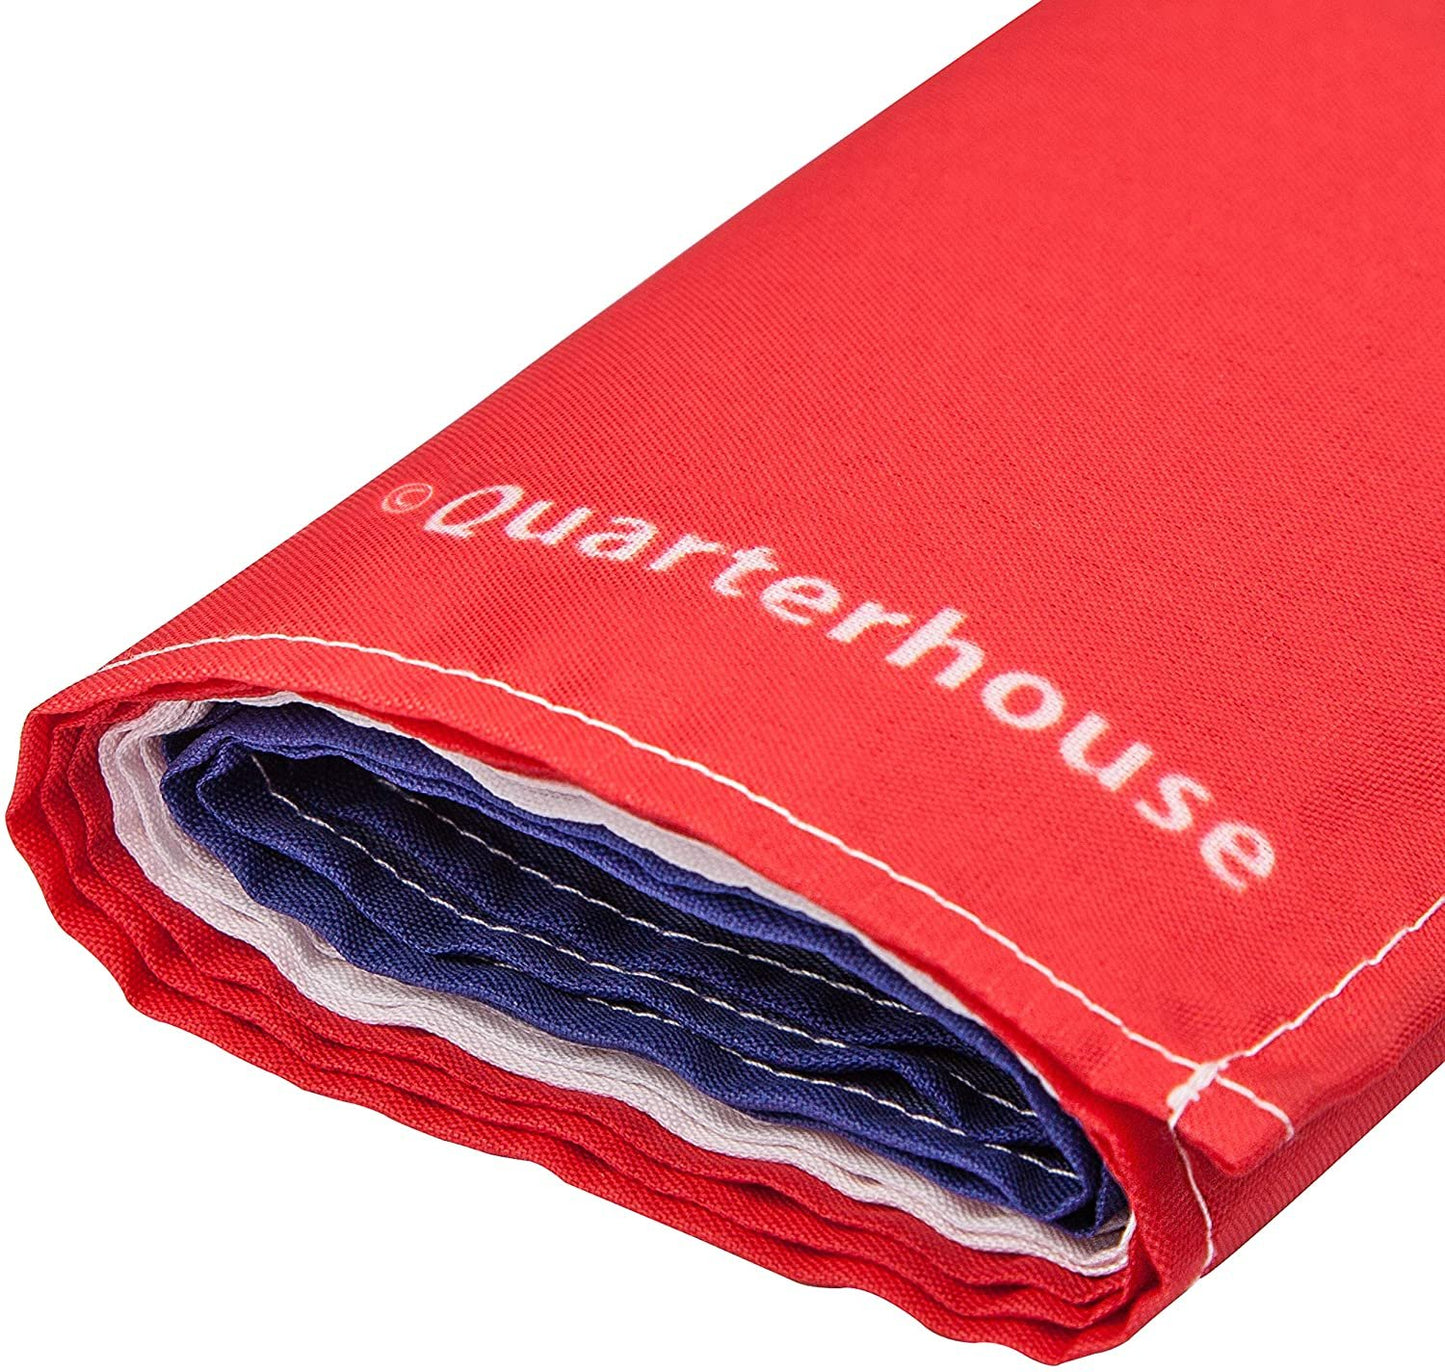 Quarterhouse French Welcome Banner for French Classrooms, Restaurants, Bilingual Businesses, Special Events - Flag of France (Blue, White & Red) Background - Polyester, 60 x 10 Inches